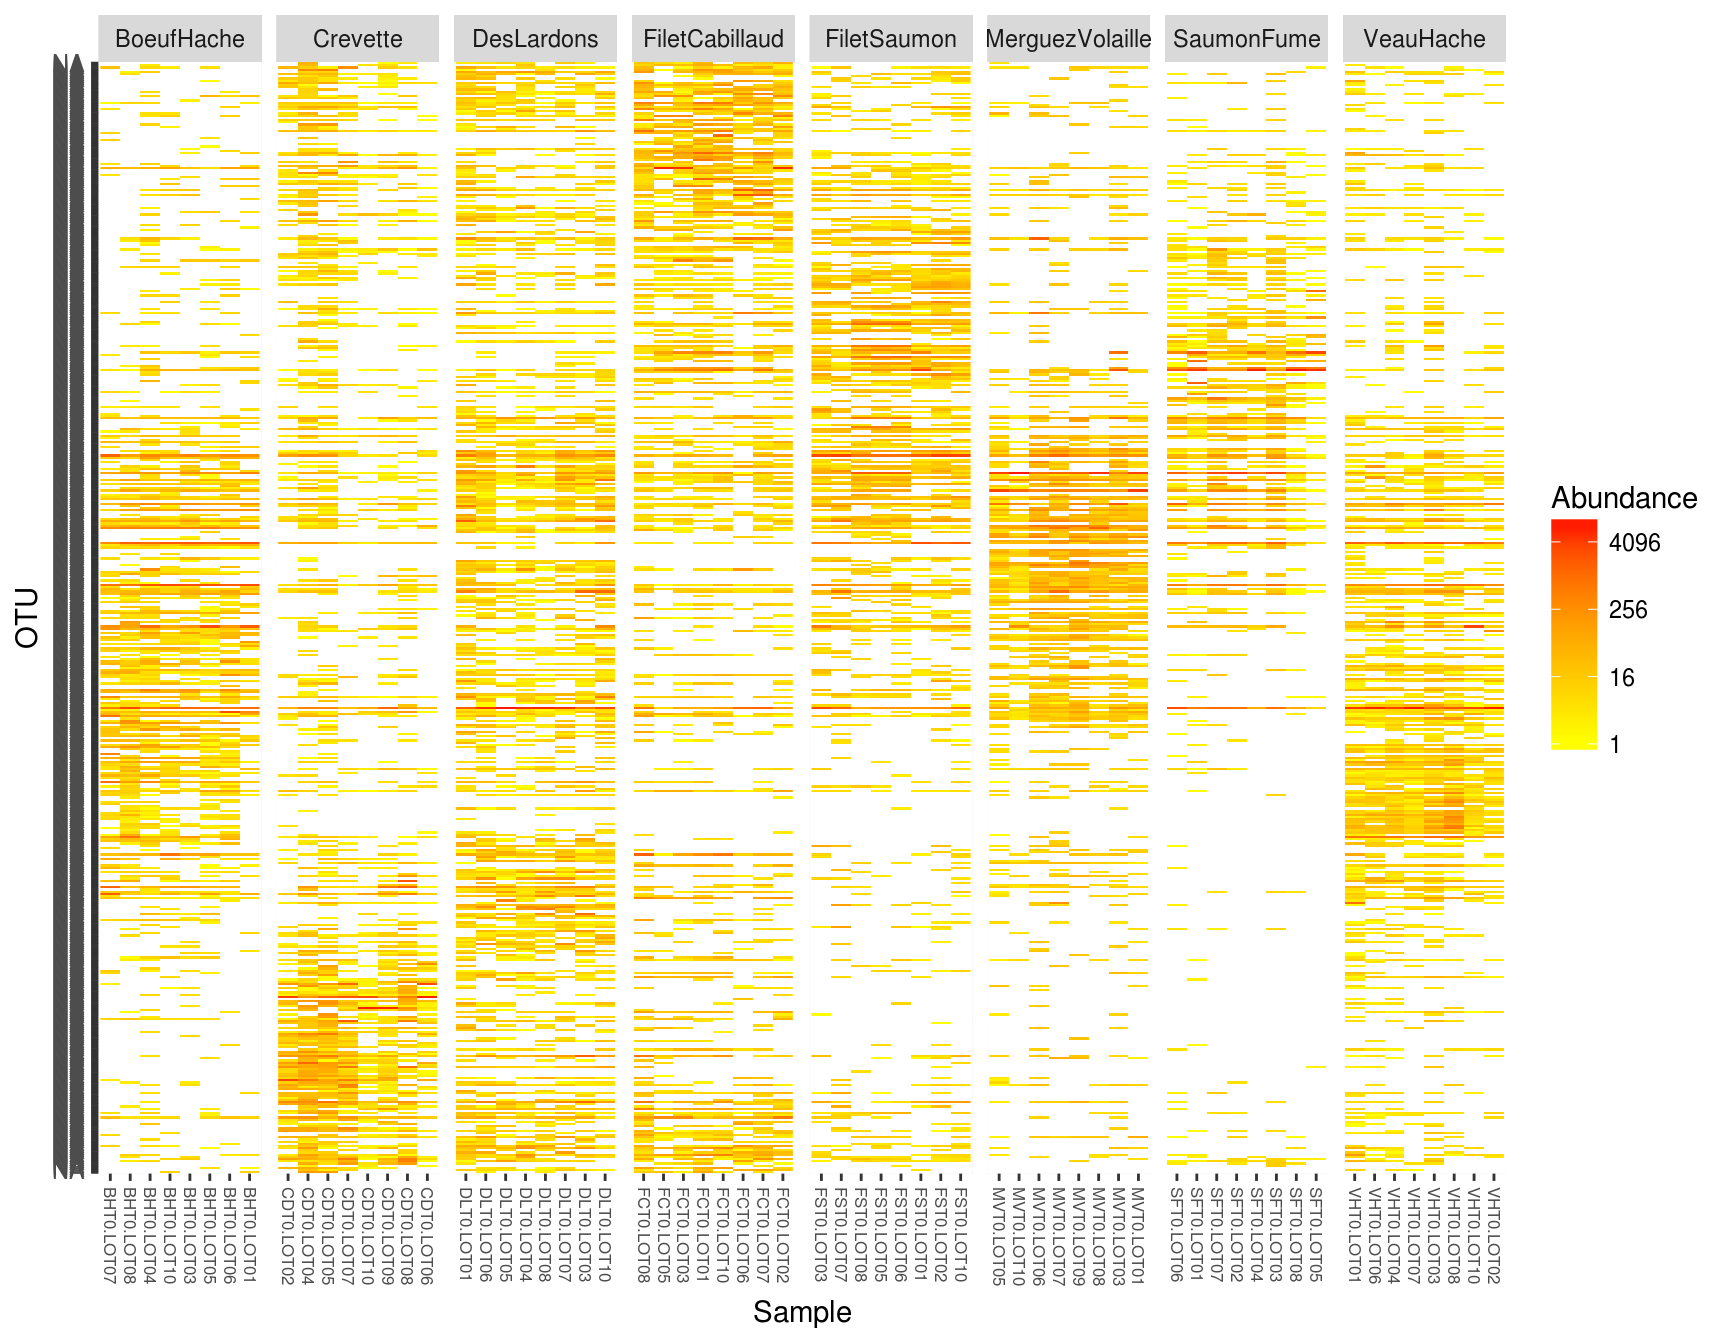 /repository/static/images/ebf89eed93a25147/static%2Fimages%2Ffrogs_images%2Fphyloseq_plot_heatmap_red.png